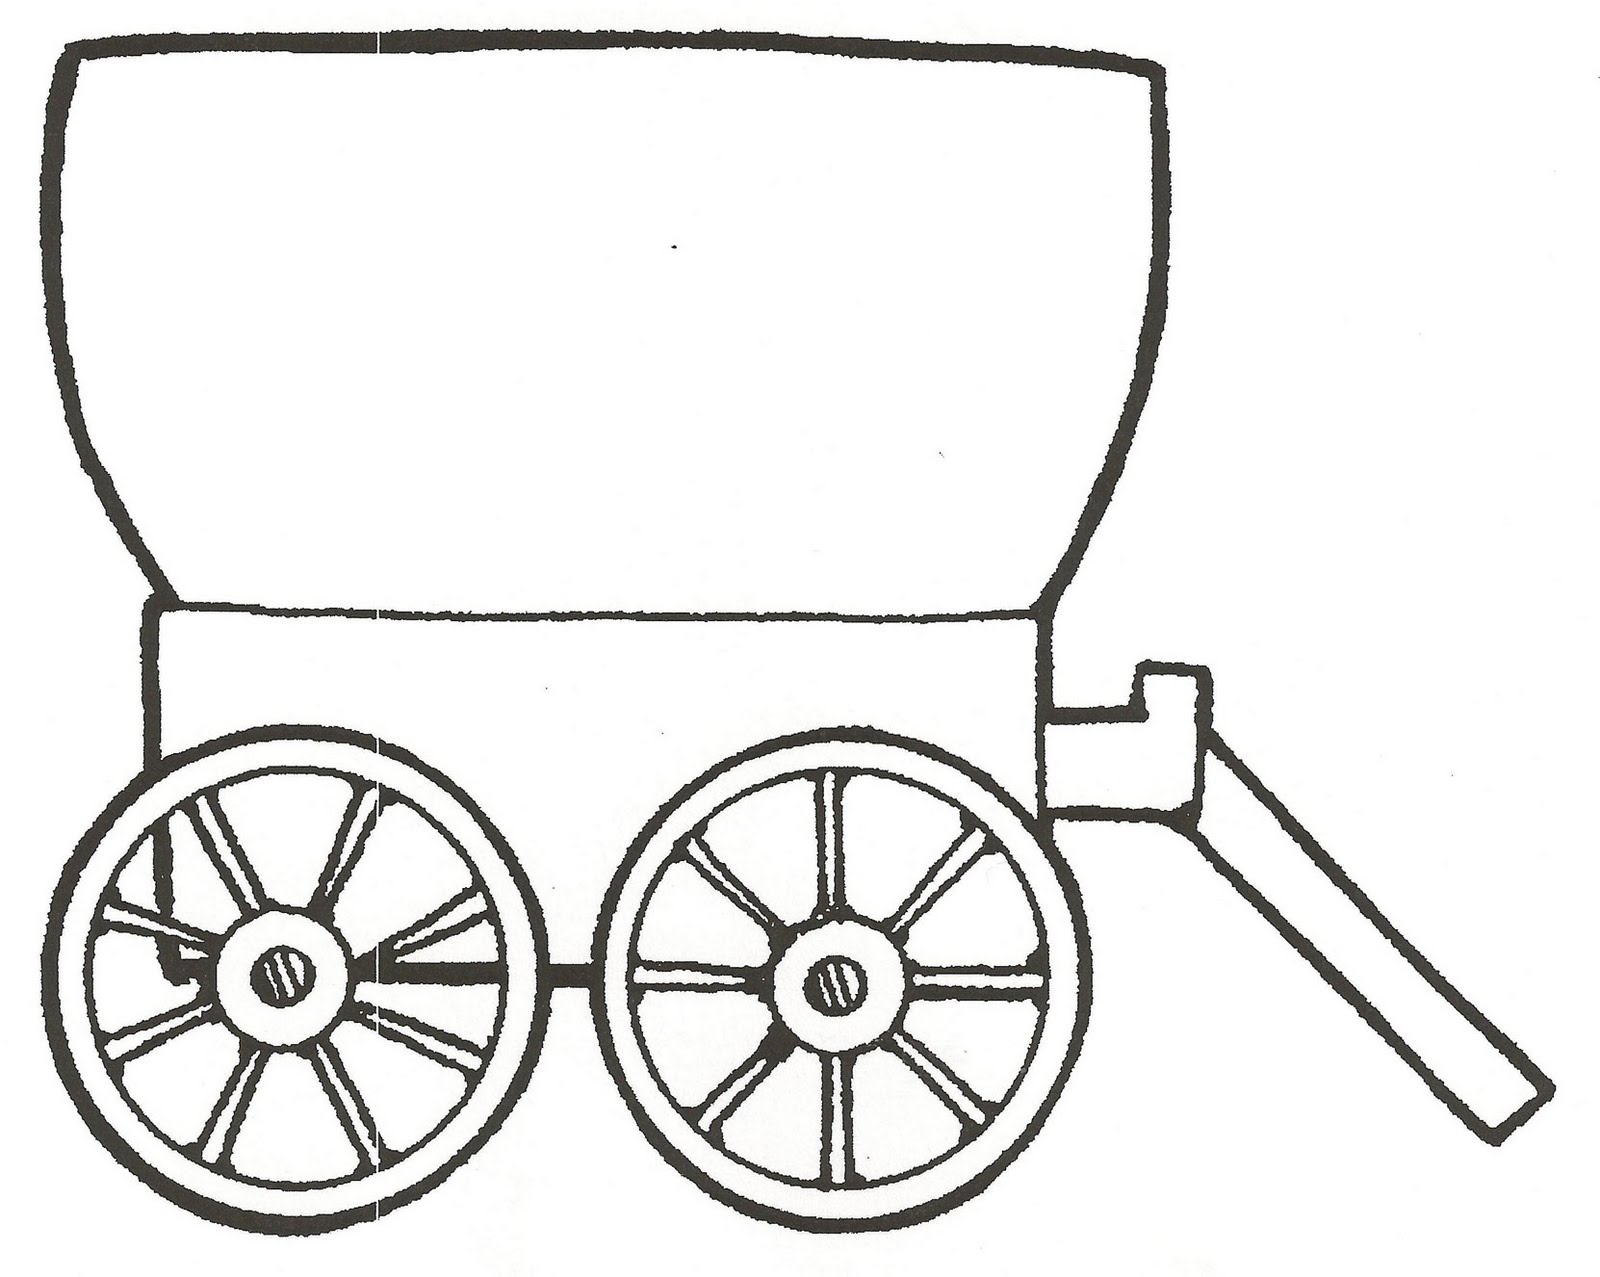 Covered Wagon Clip Art - ClipArt Best